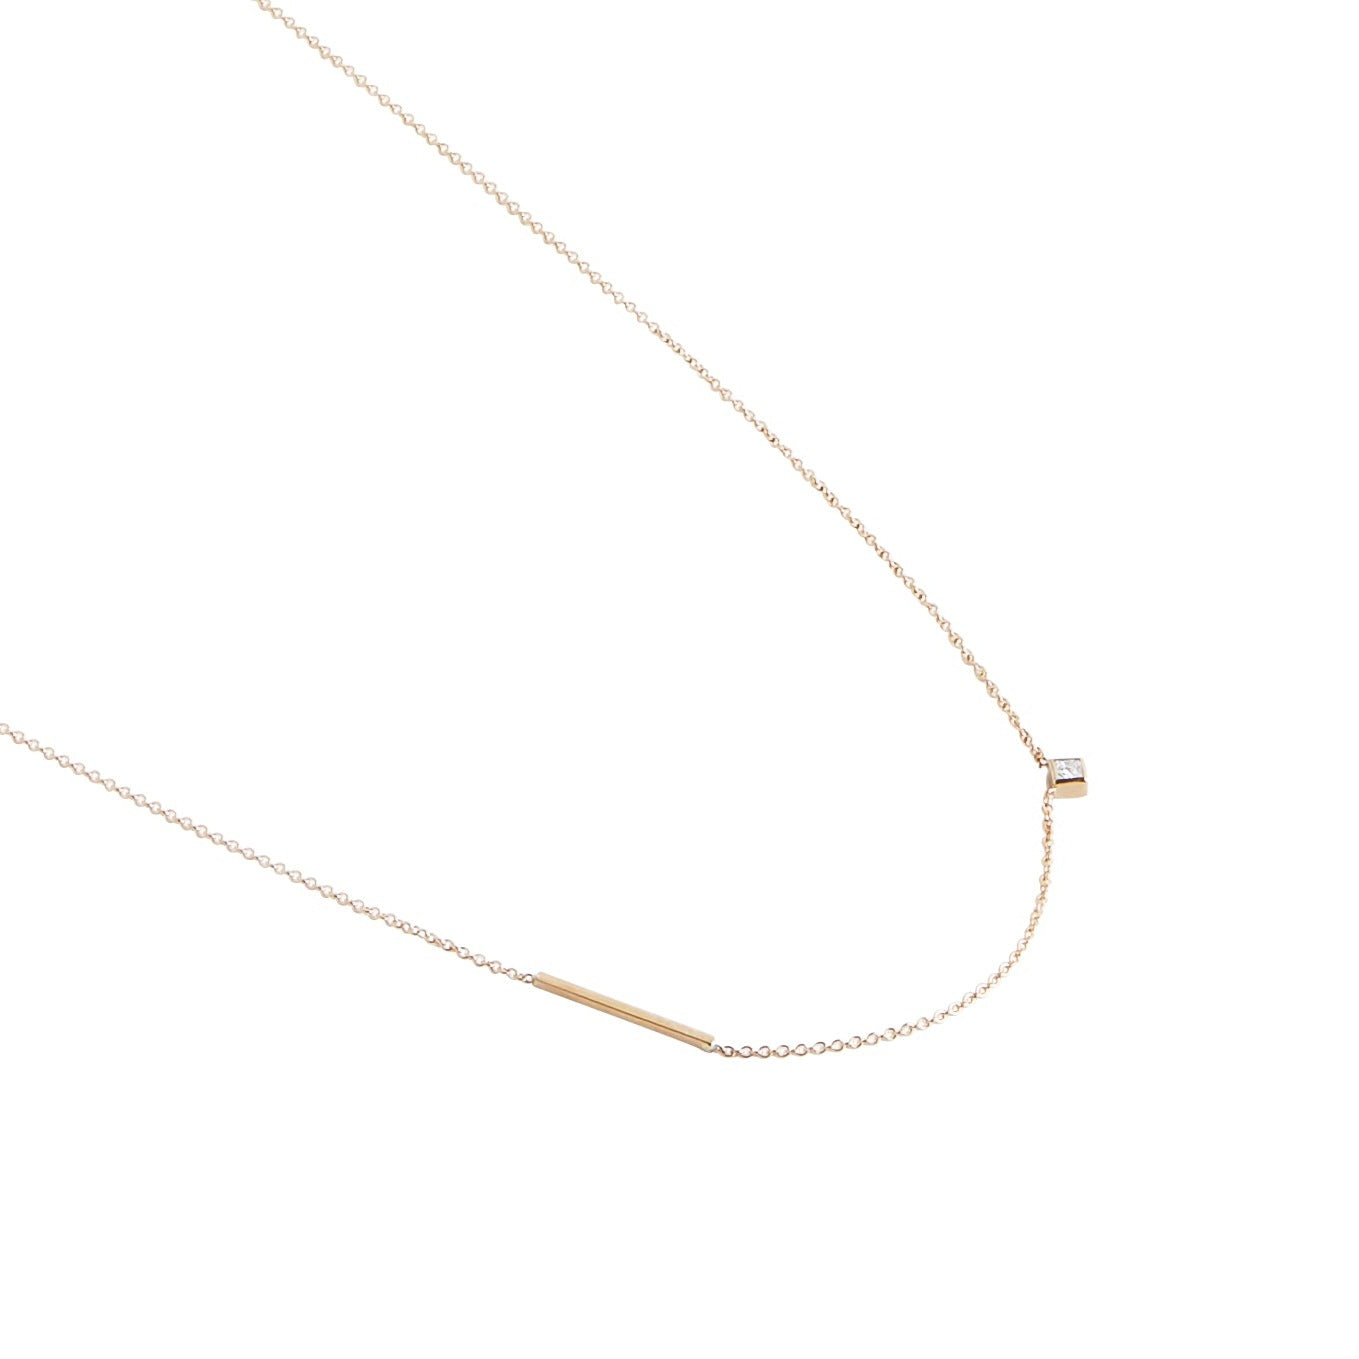 Inu Unique Necklace in 14k Gold Set with White Diamond By SHW Fine Jewelry NYC